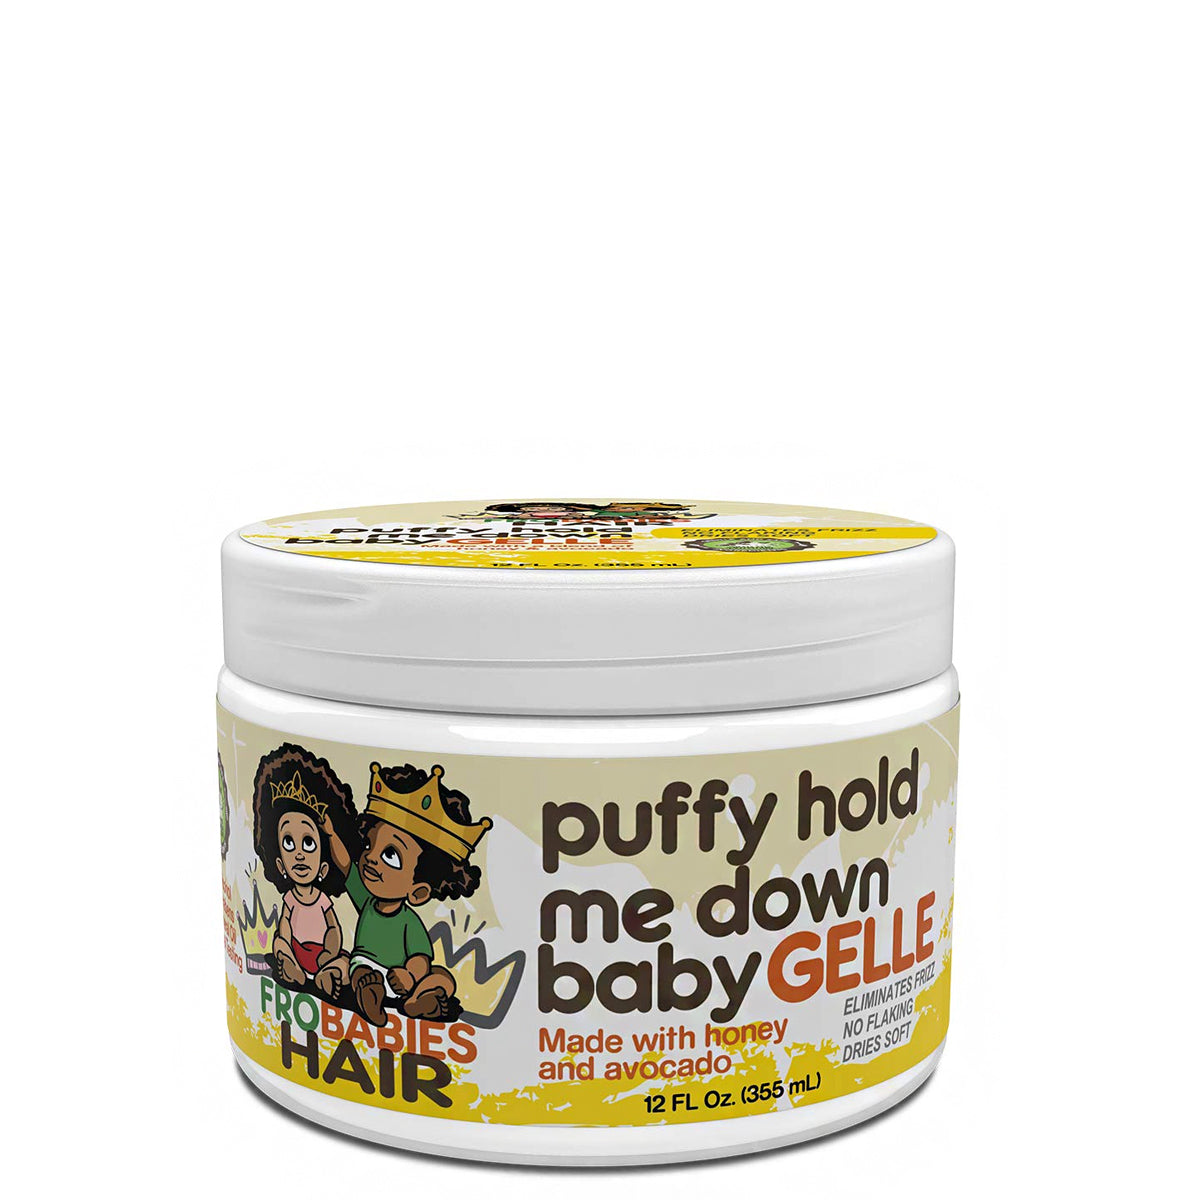 Fro Babies Hair Puffy Hold Me Down Baby Gelle 12oz